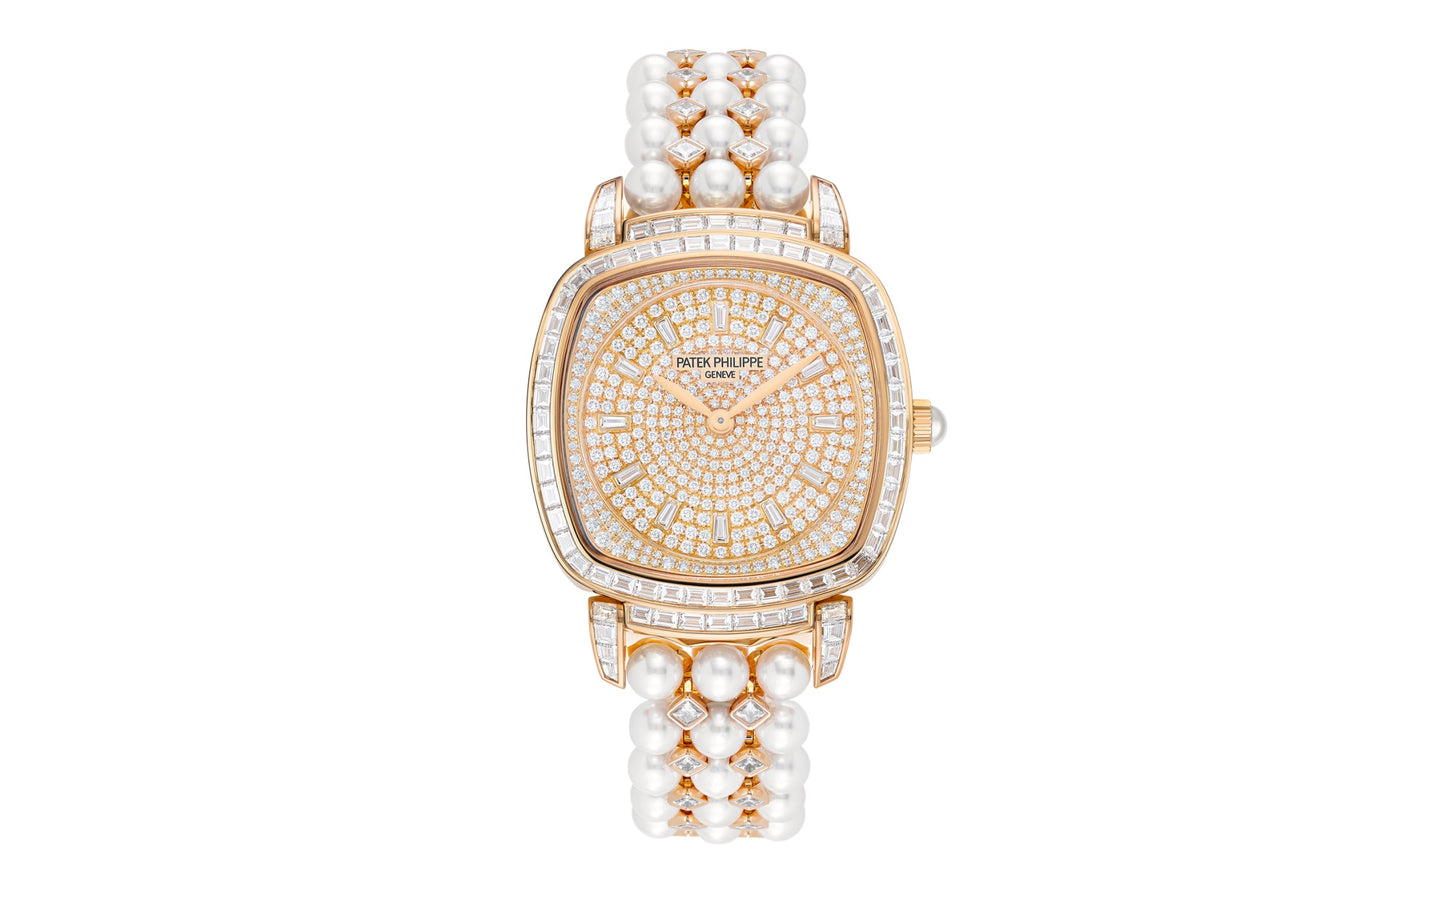 Patek Philippe Ladies Gondolo Haute Joaillerie, 18kt Rose Gold set with diamonds and Akoya pearls, 31 × 34.8mm, Ref# 7042/100R-010, 1